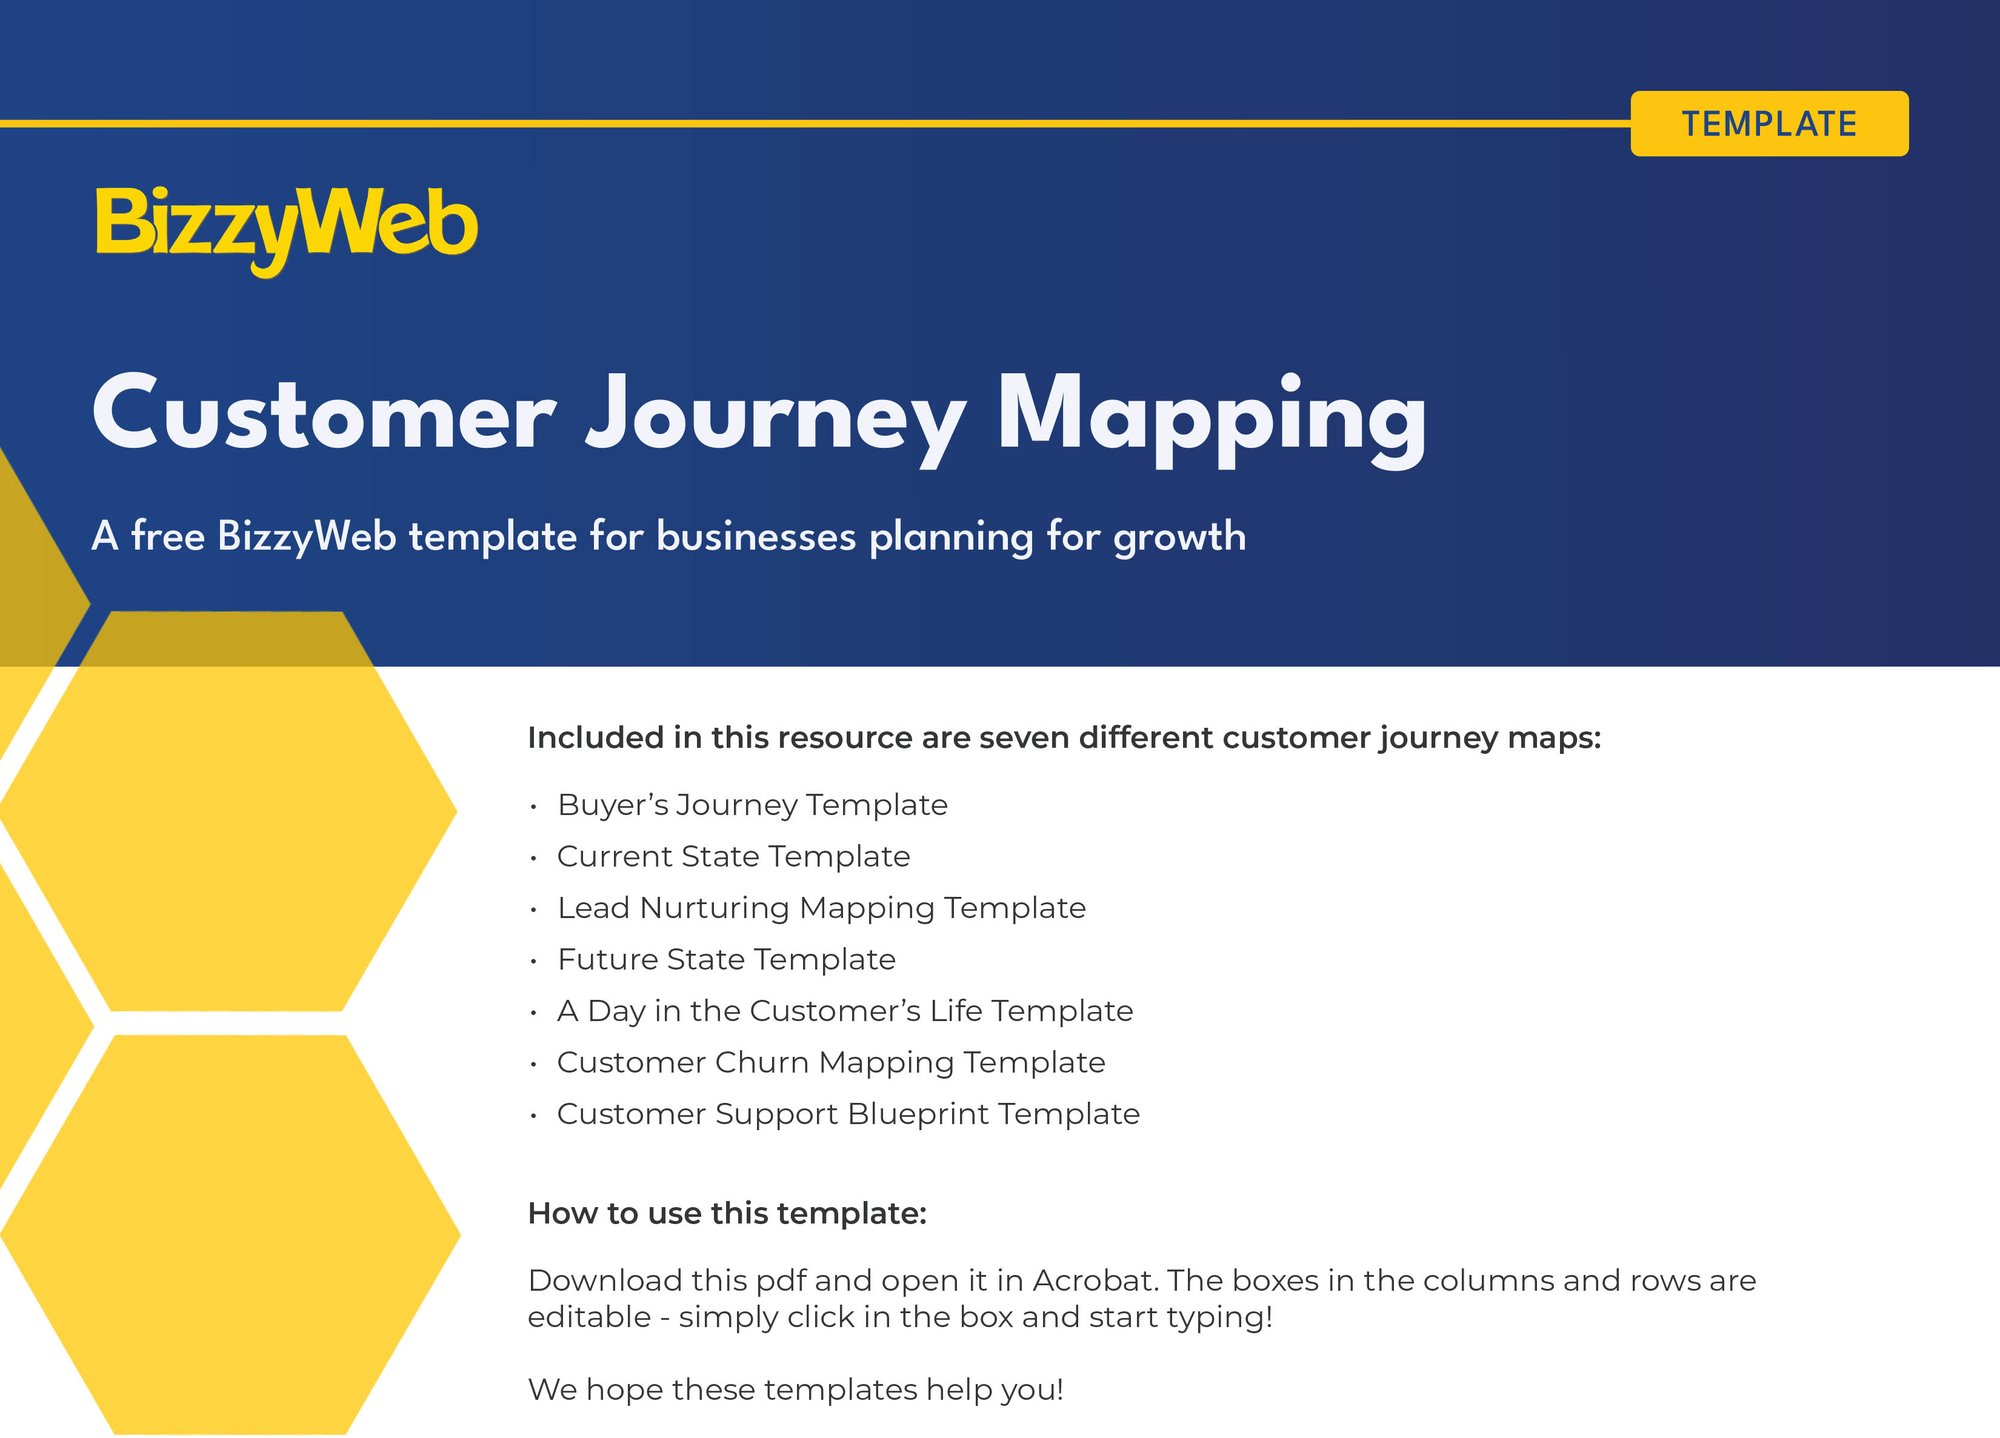 Customer Journey Map Template COVER